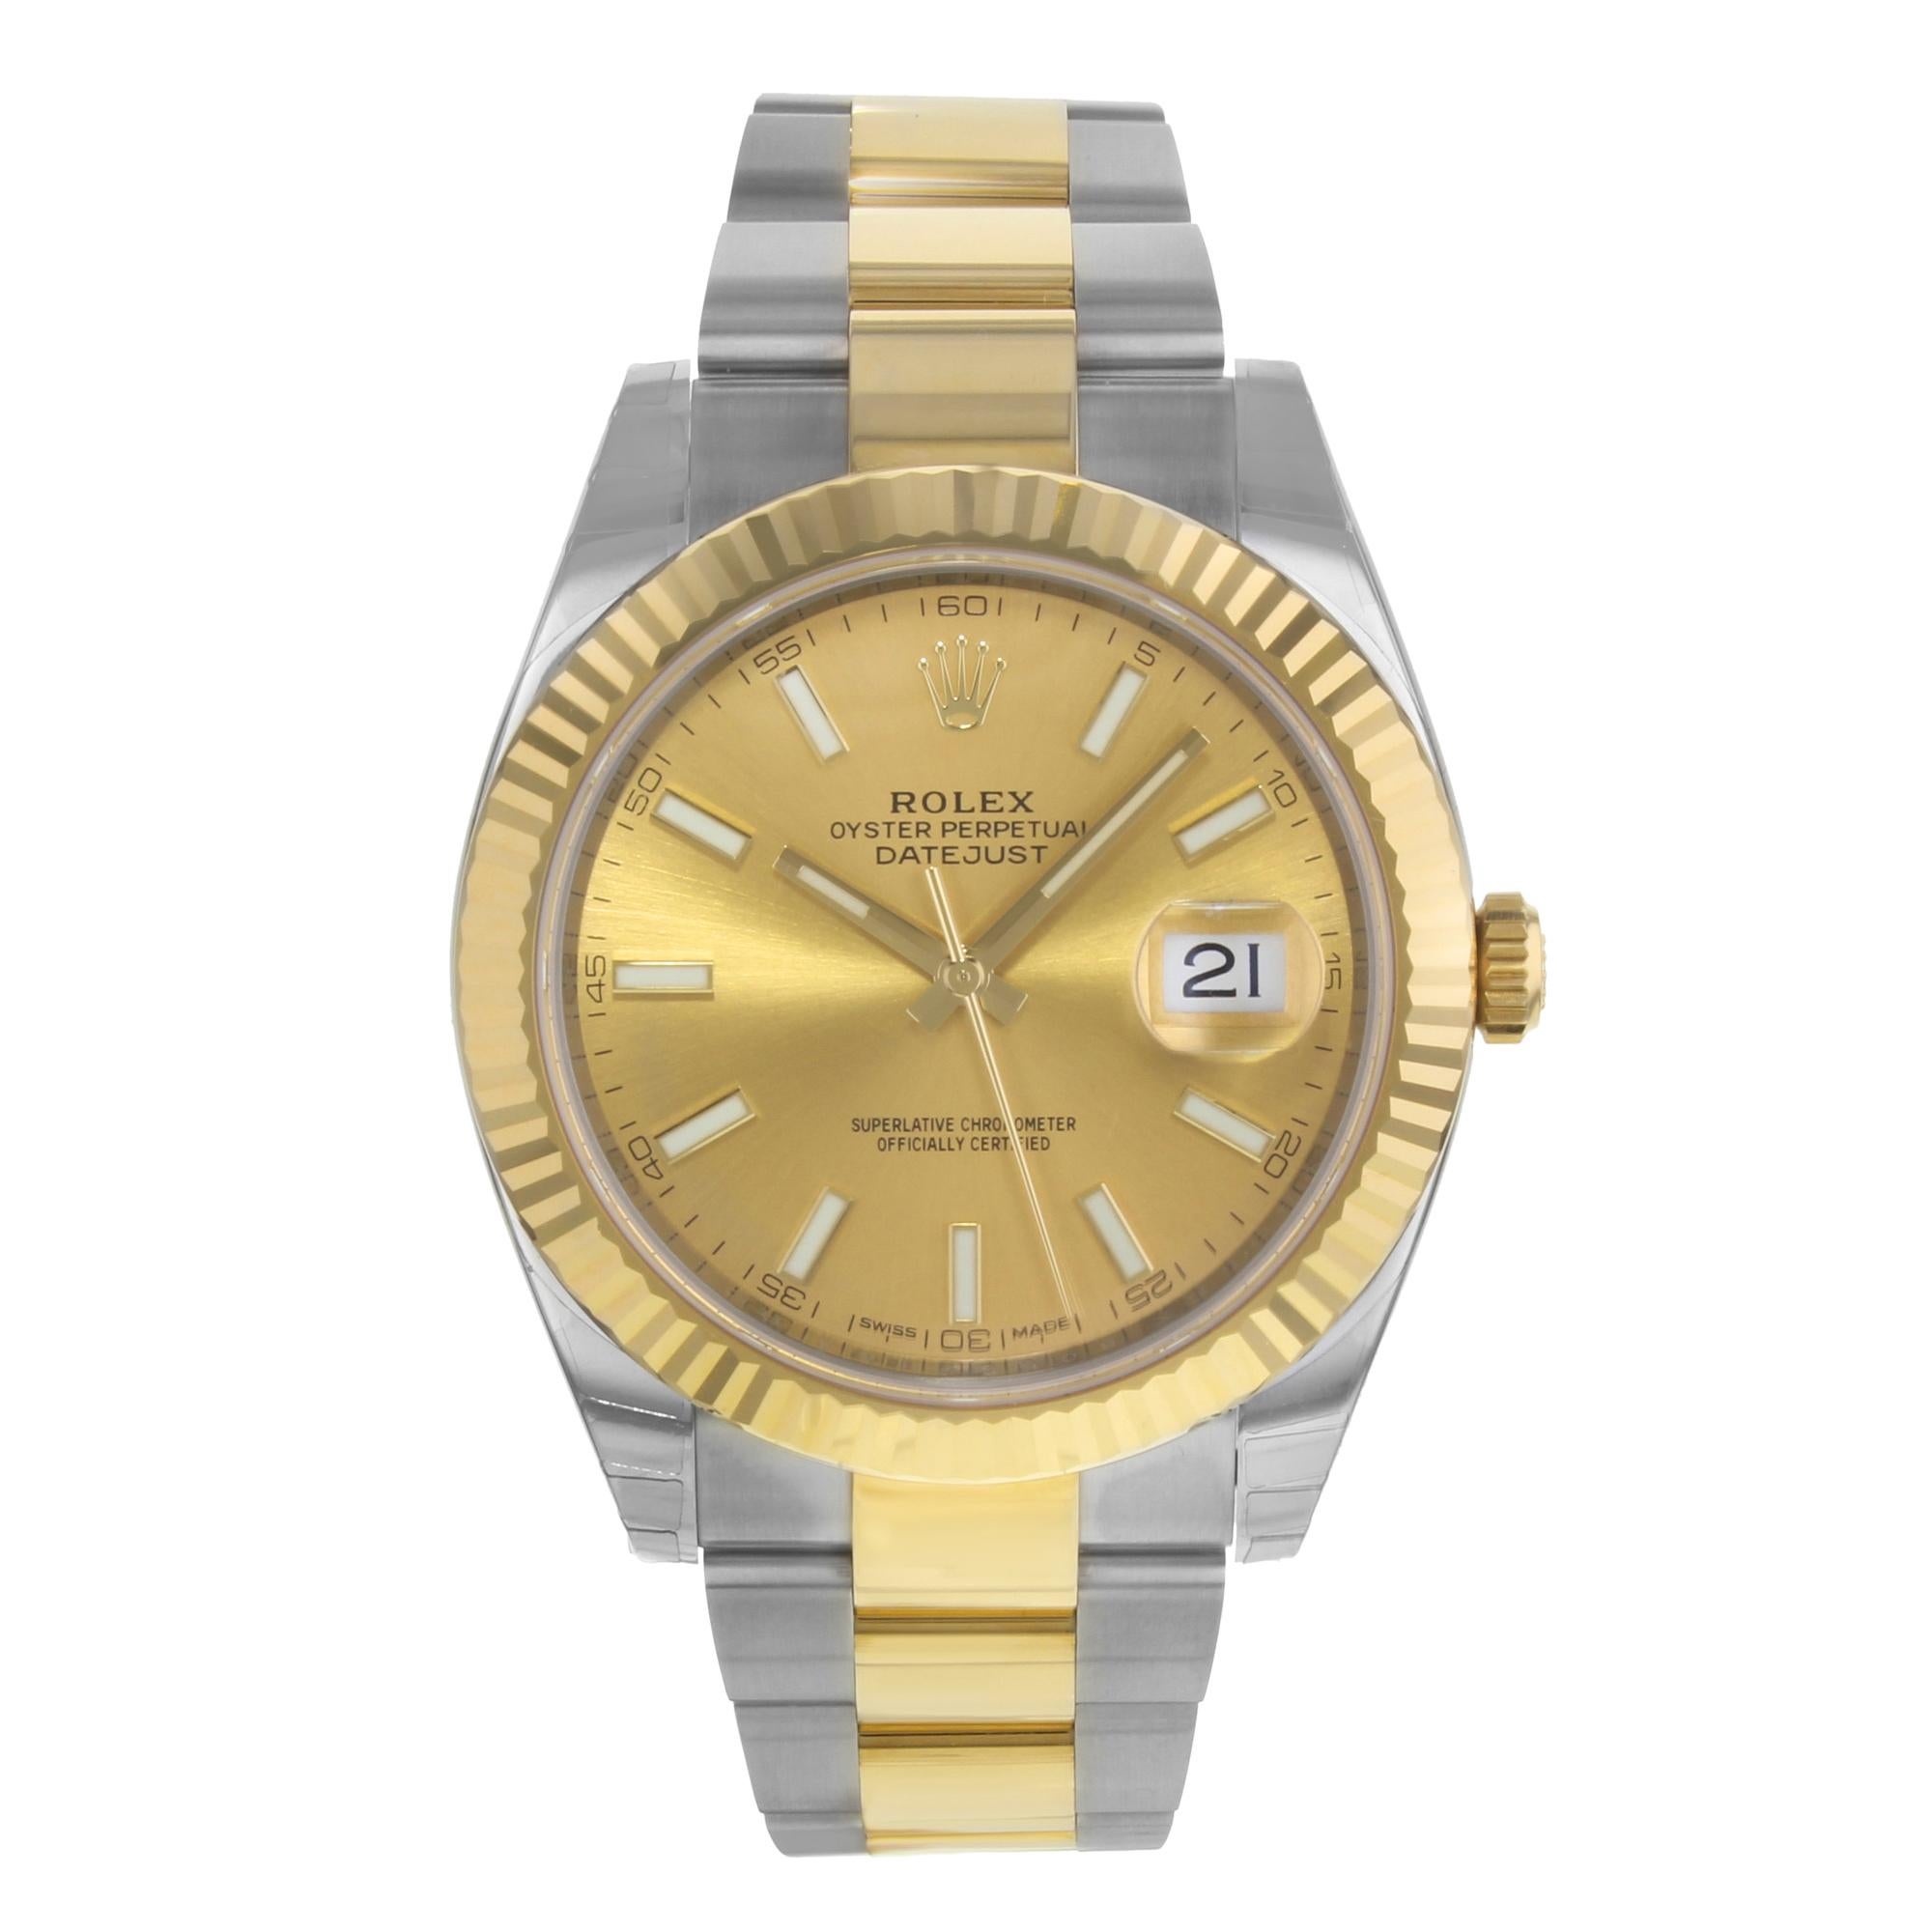 This brand new Rolex Datejust 41 126333 is a beautiful men's timepiece that is powered by mechanical (automatic) movement which is cased in a stainless steel case. It has a round shape face, date indicator dial and has hand sticks style markers. It